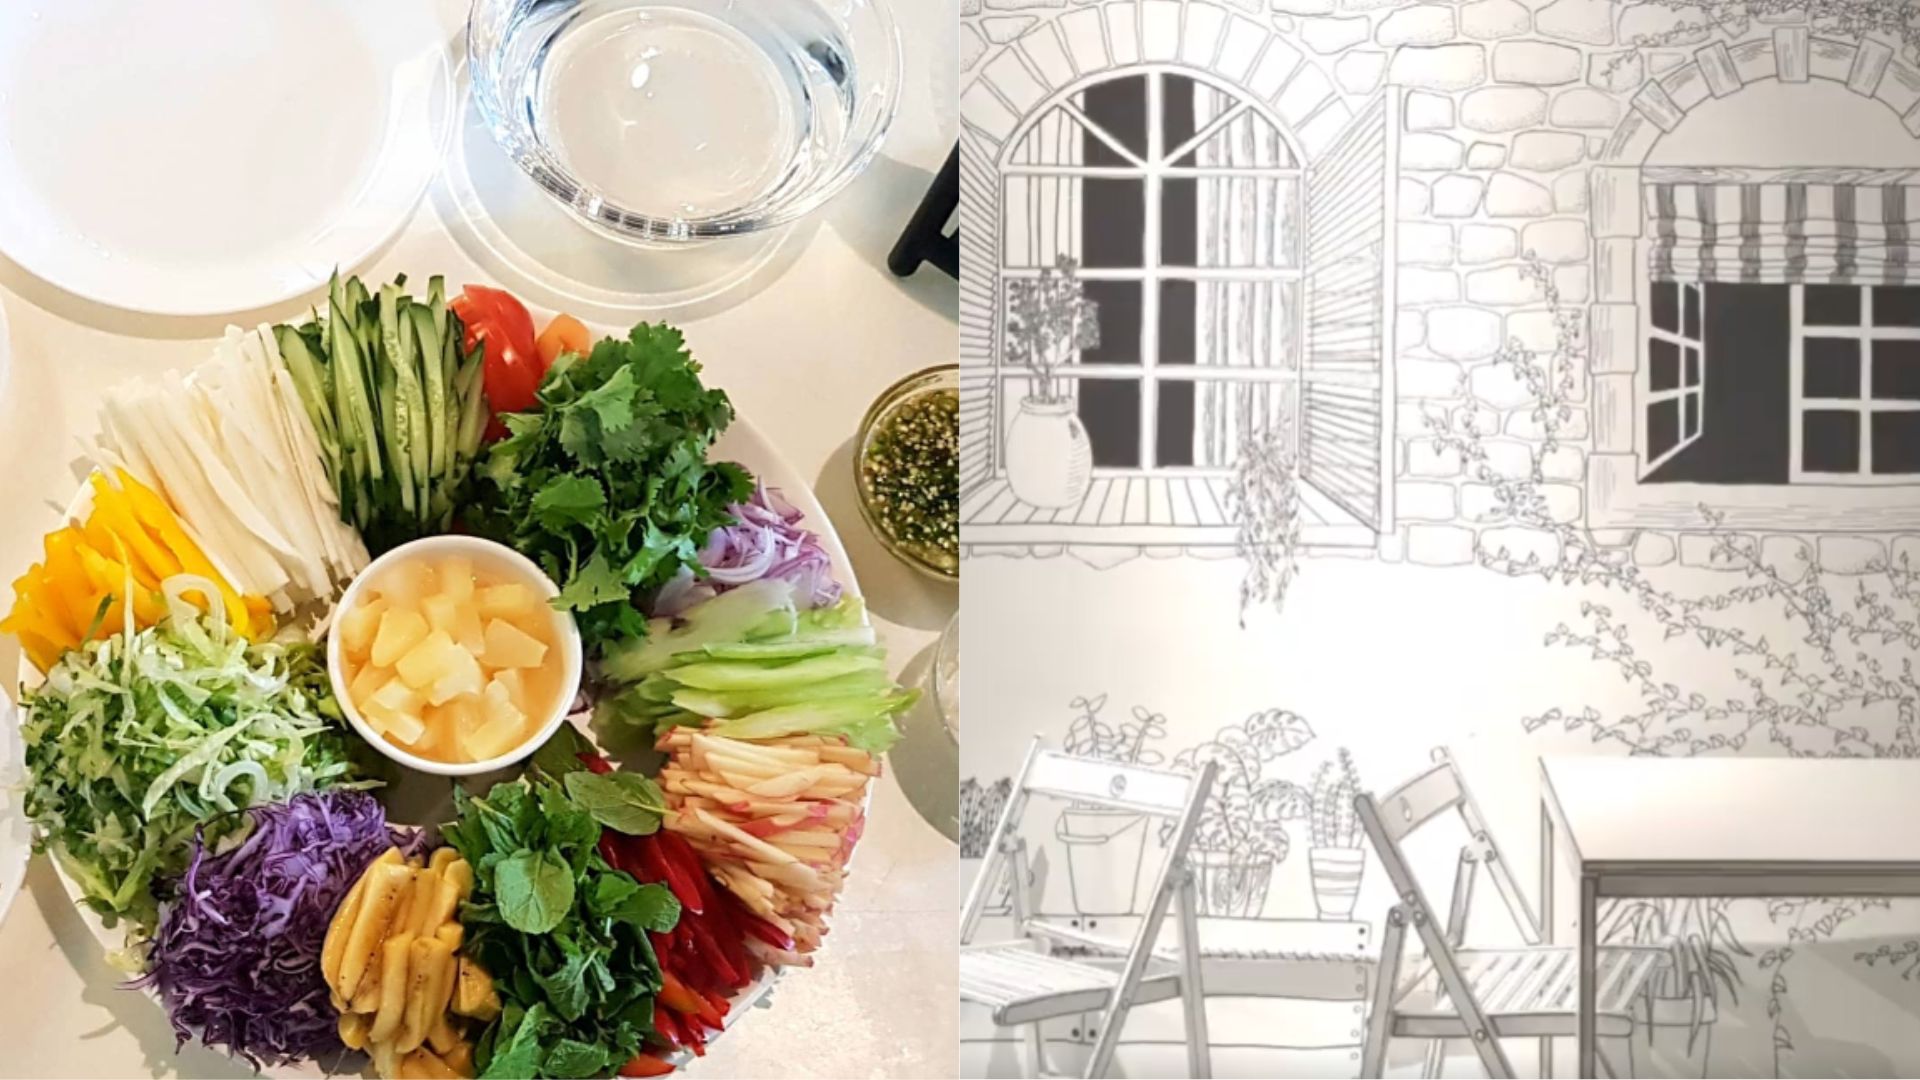 With the trending of cafe hopping, you can also find Korean dishes in an art cafe! Enjoy your dishes while looking at the beautiful art in Arete Cafe! 